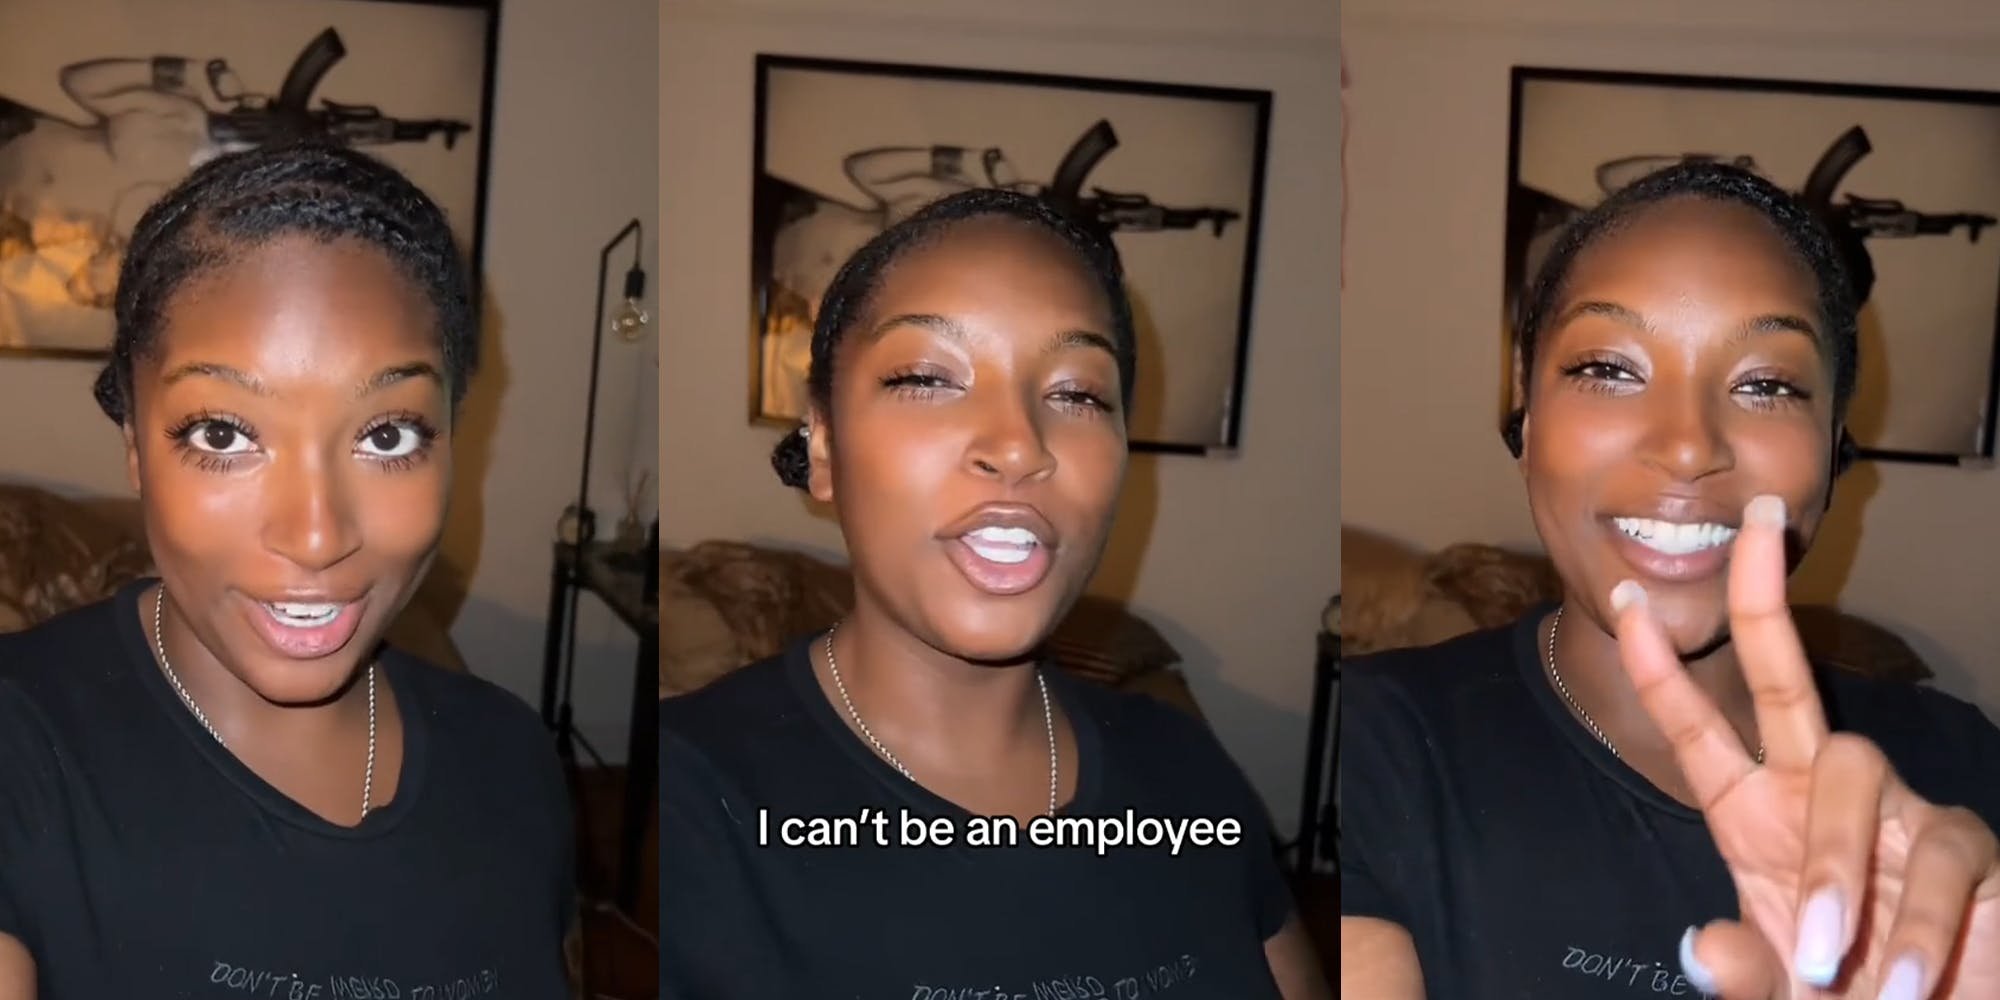 'I knew I couldn't be an employee anymore when…': Worker lies about having 2 jobs so she can show up late to her new one